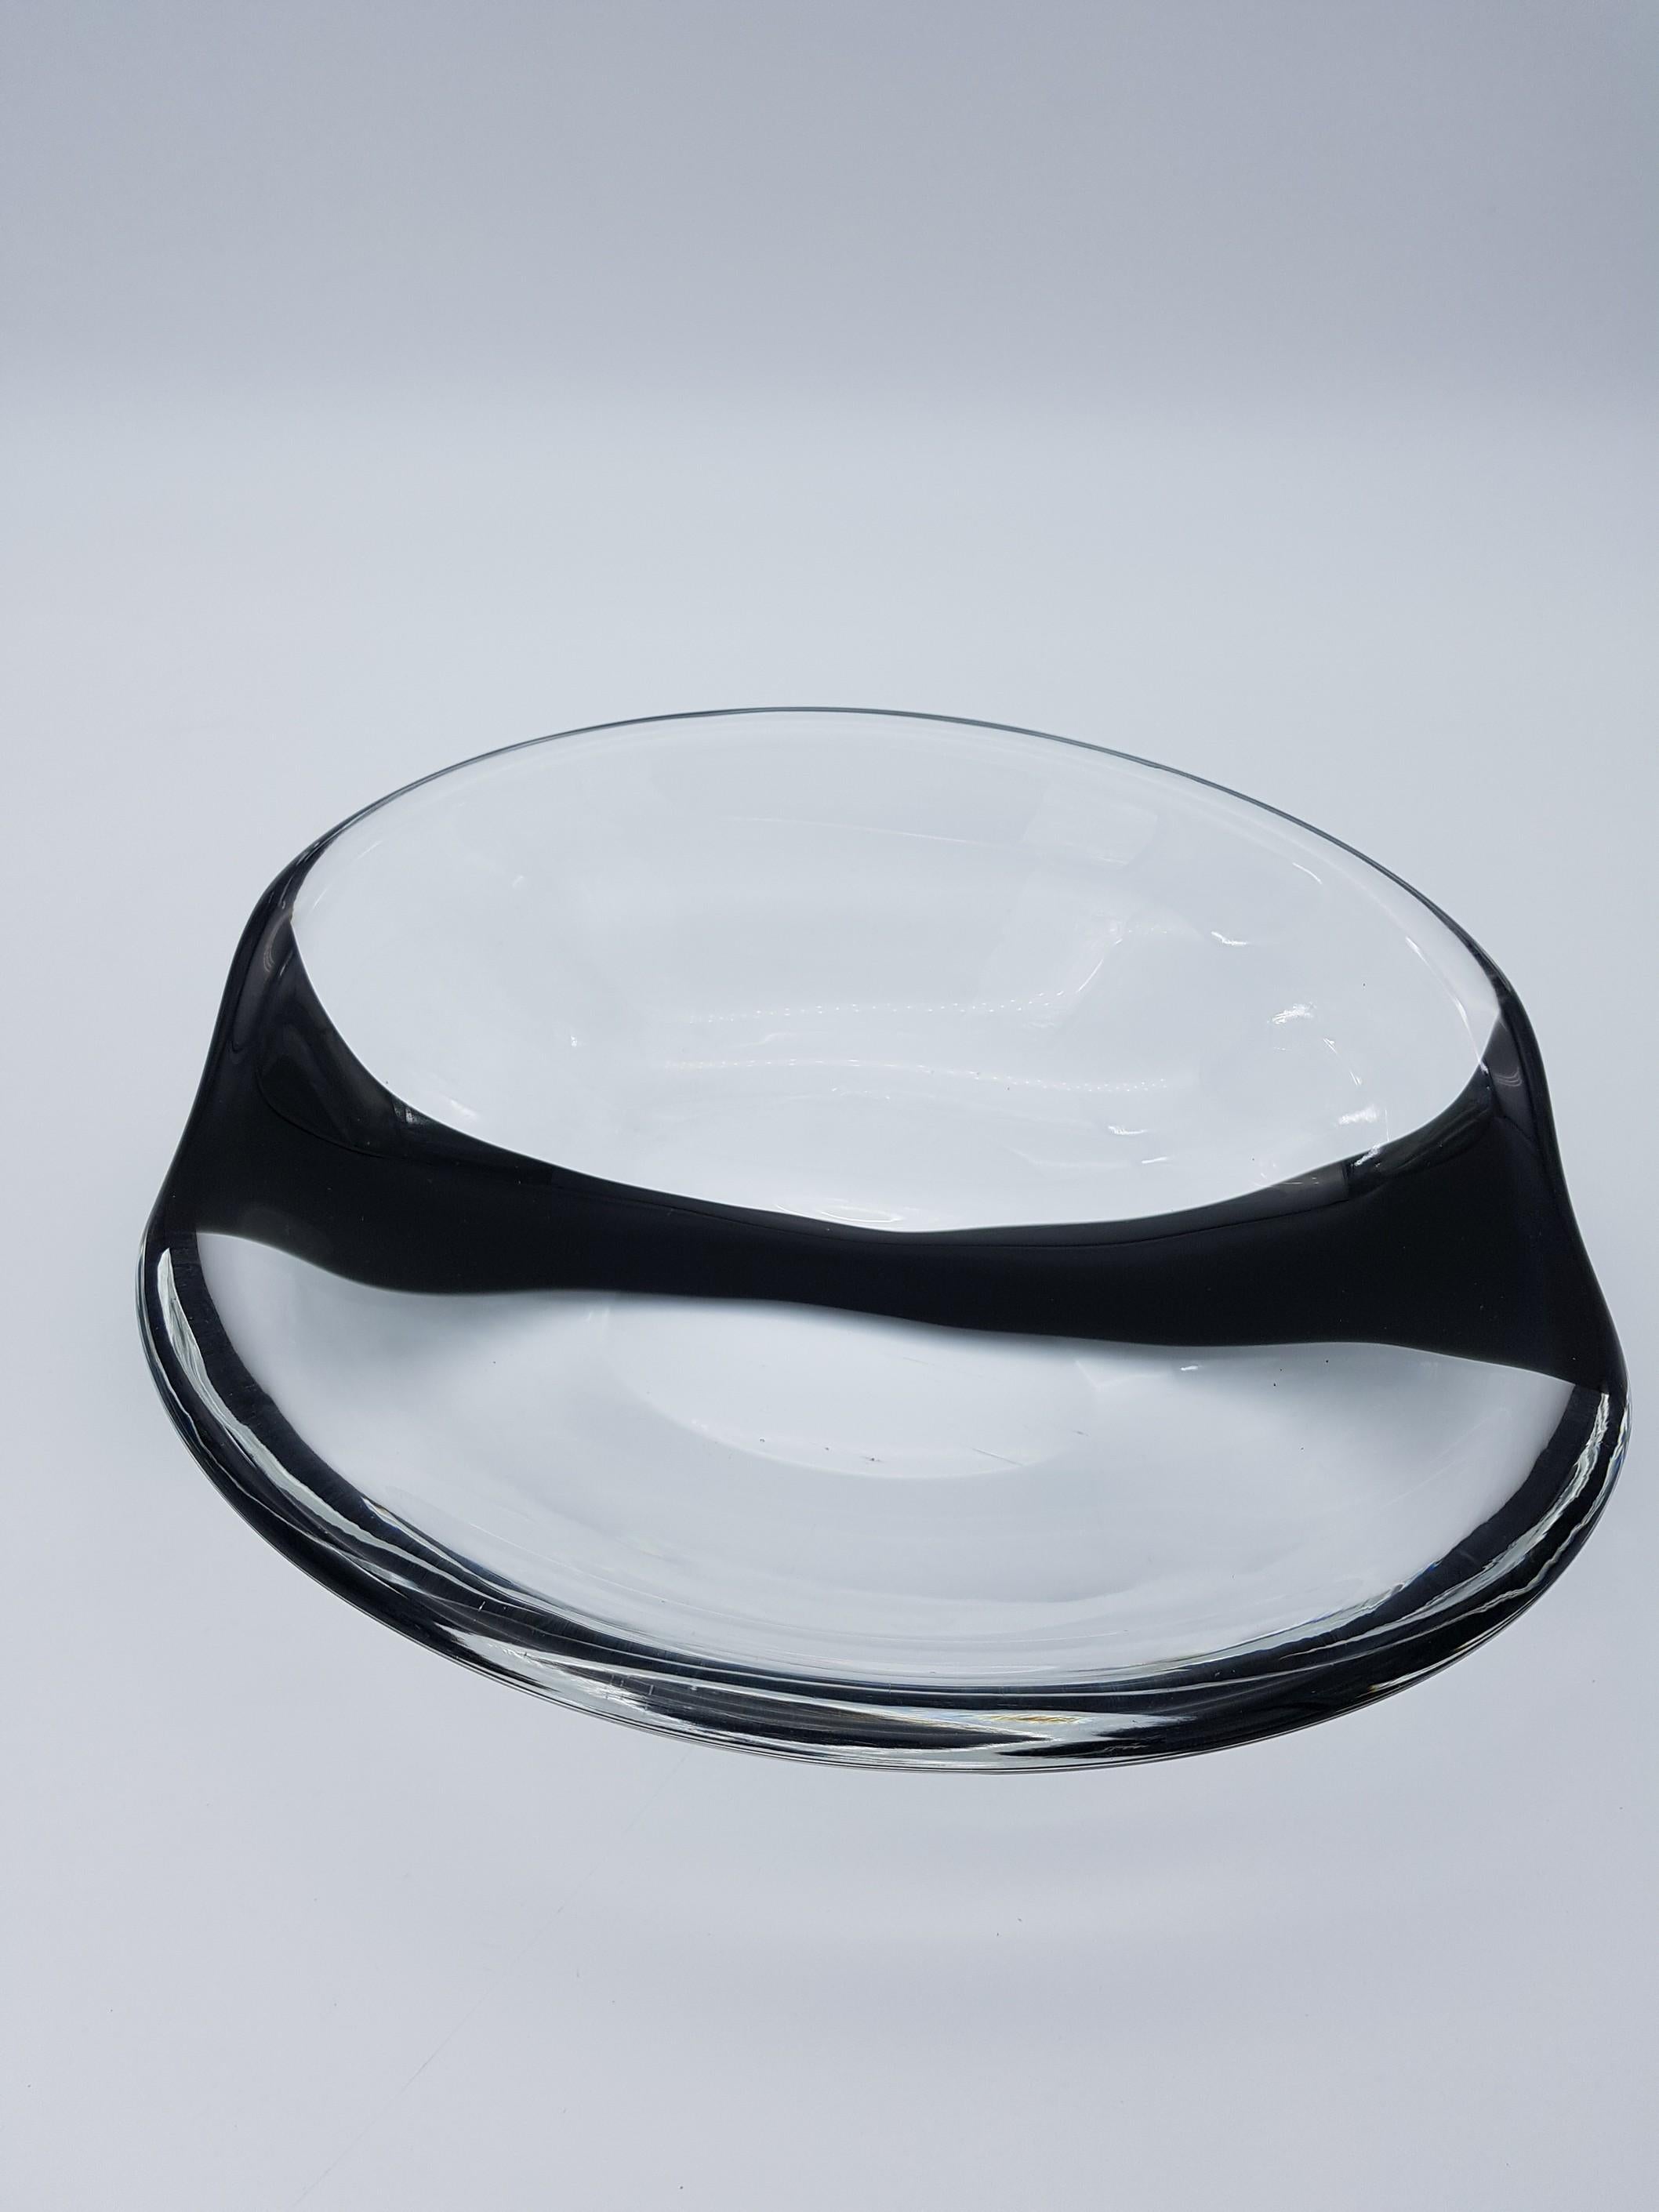 Mid-20th Century Murano Glass Centerpiece, Clear & Black by Cenedese, Design Antonio Daros, 1960s For Sale